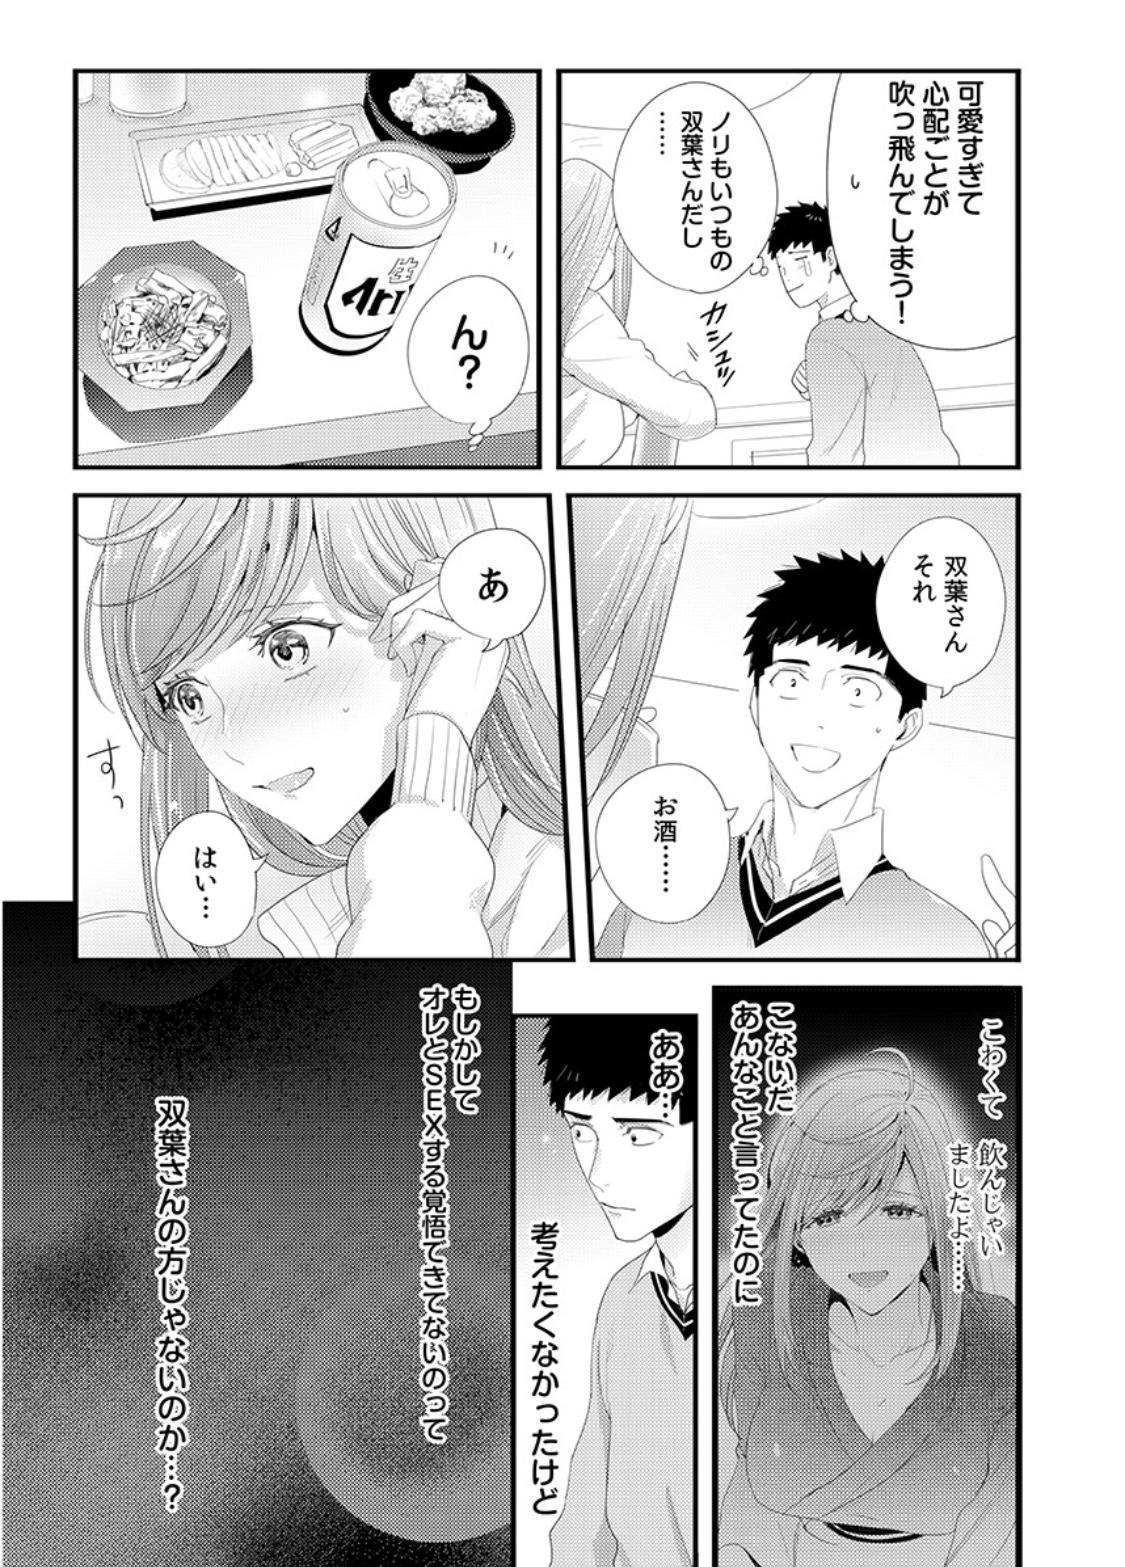 Please Let Me Hold You Futaba-San! Ch. 1-4 42